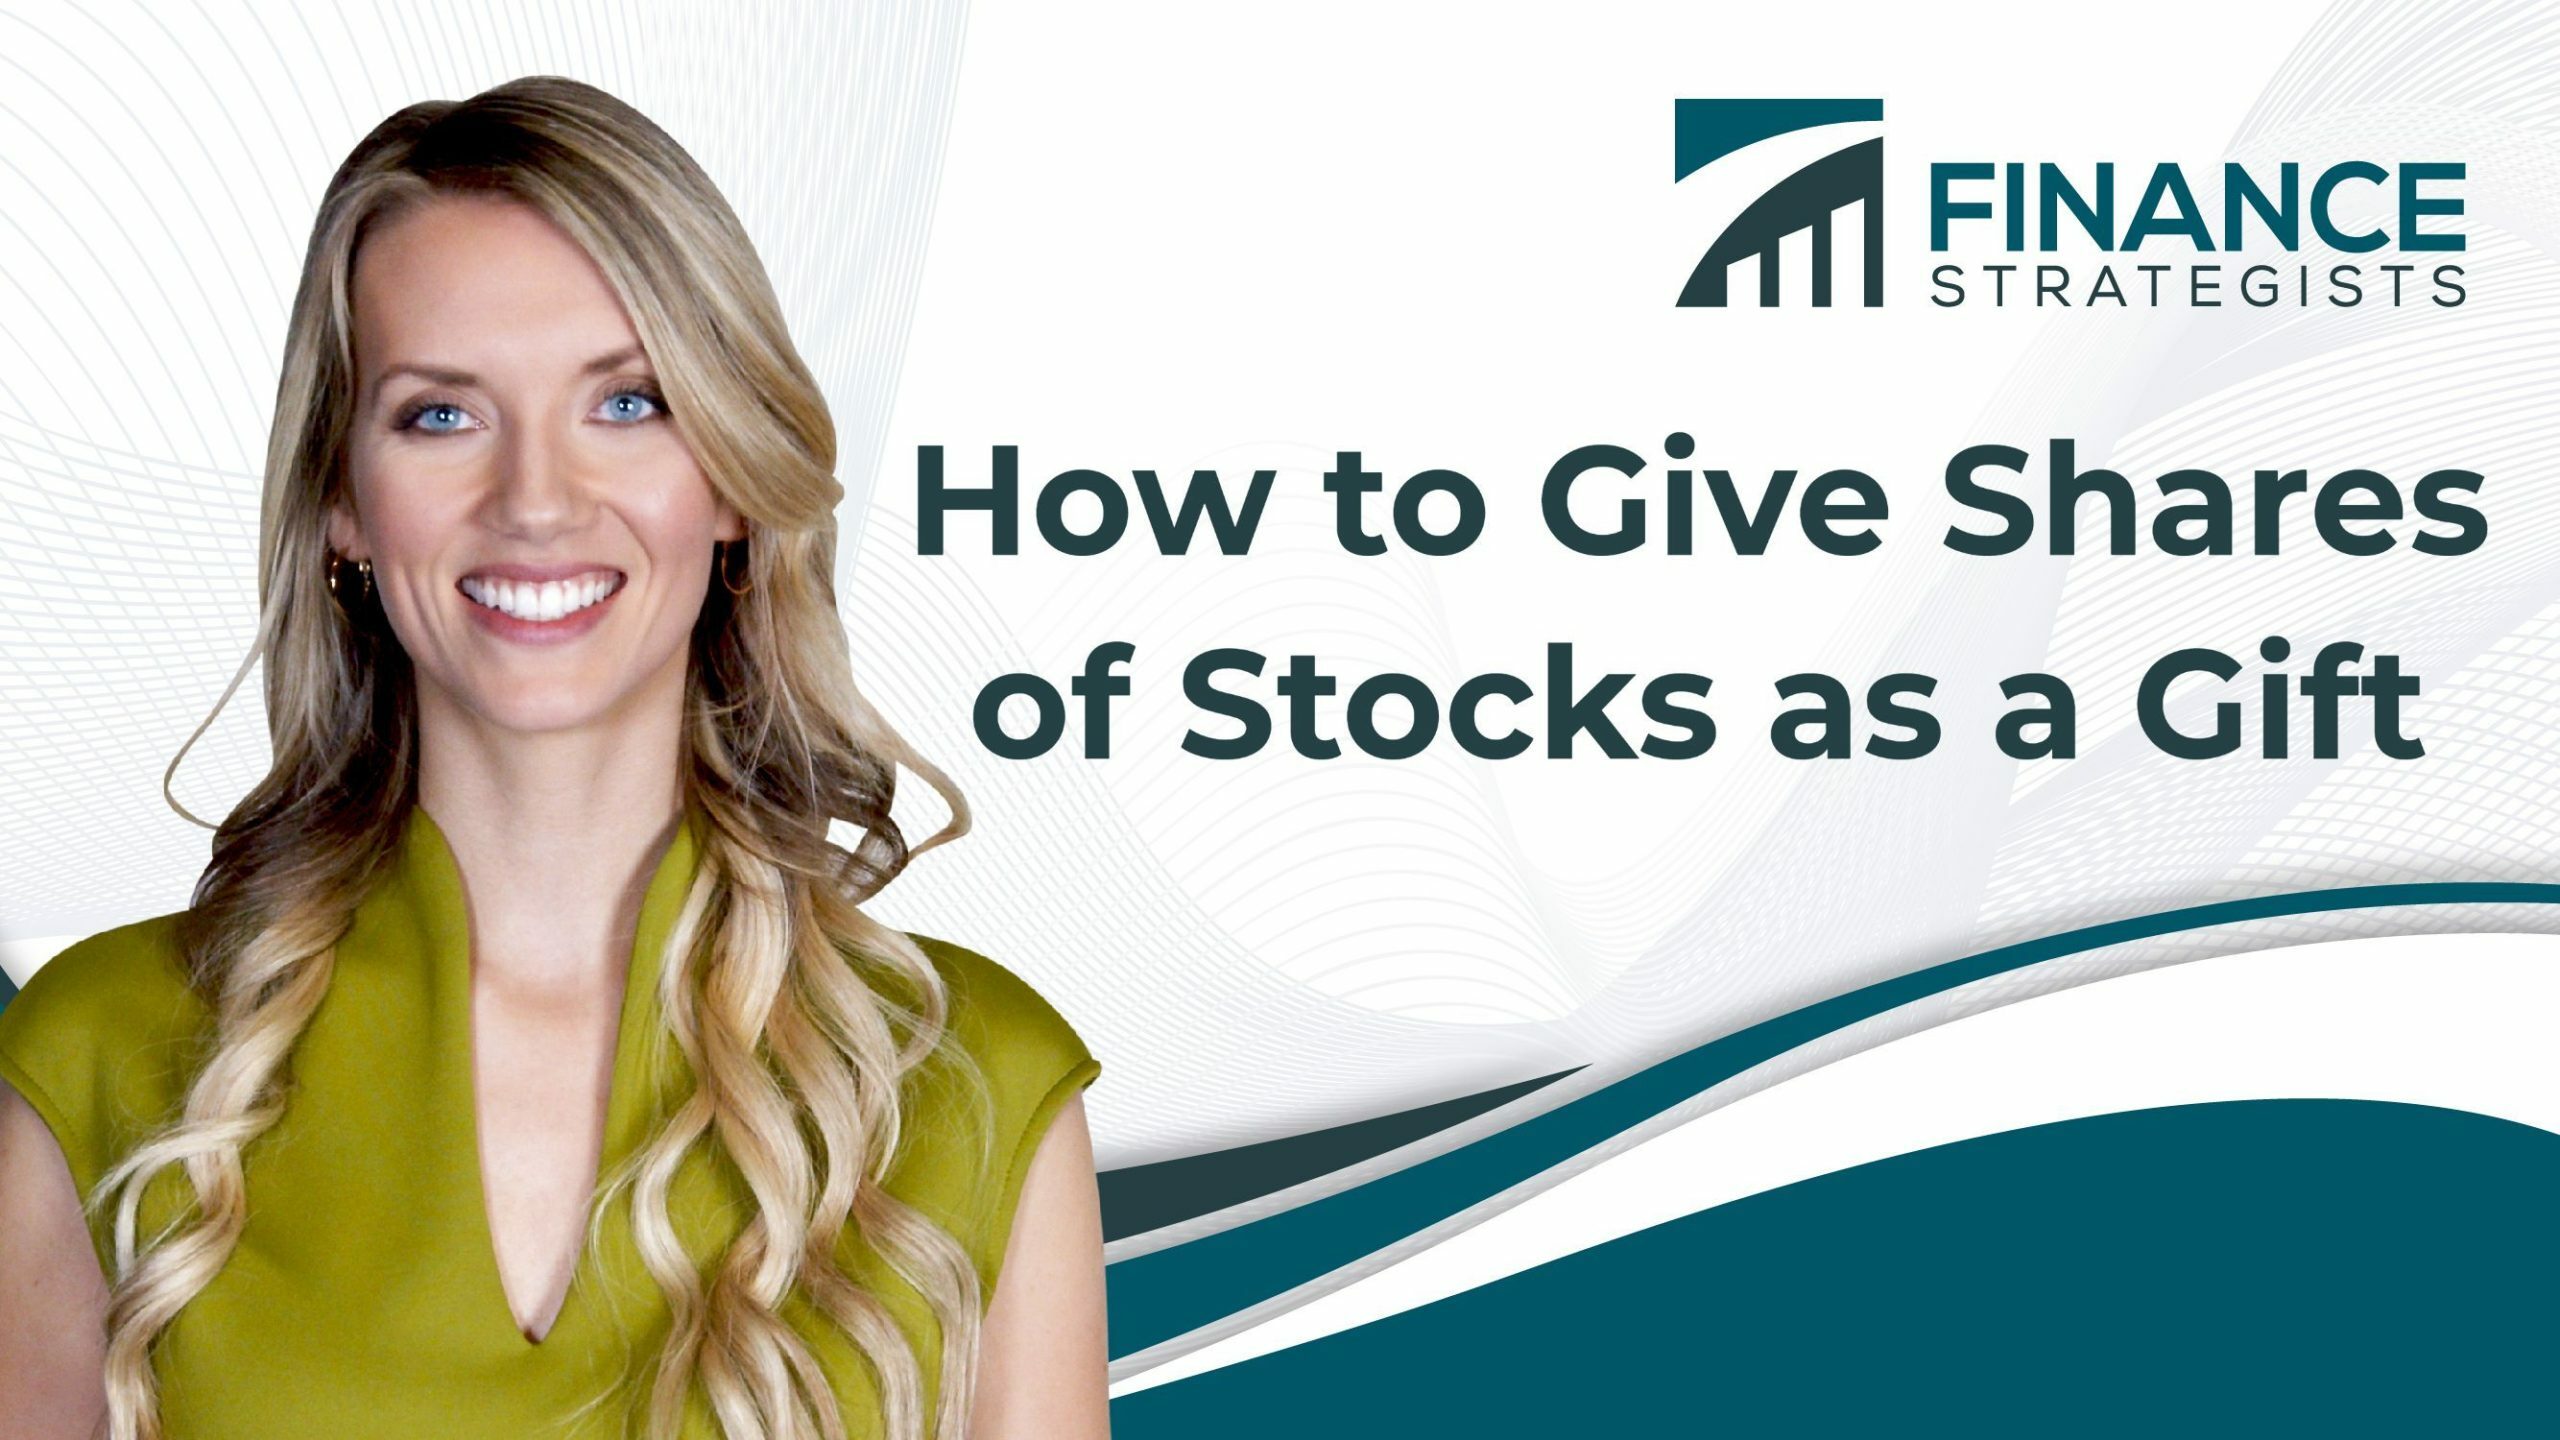 How to Gift Stock: 8 Ways to Send Stock As A Gift | SoFi